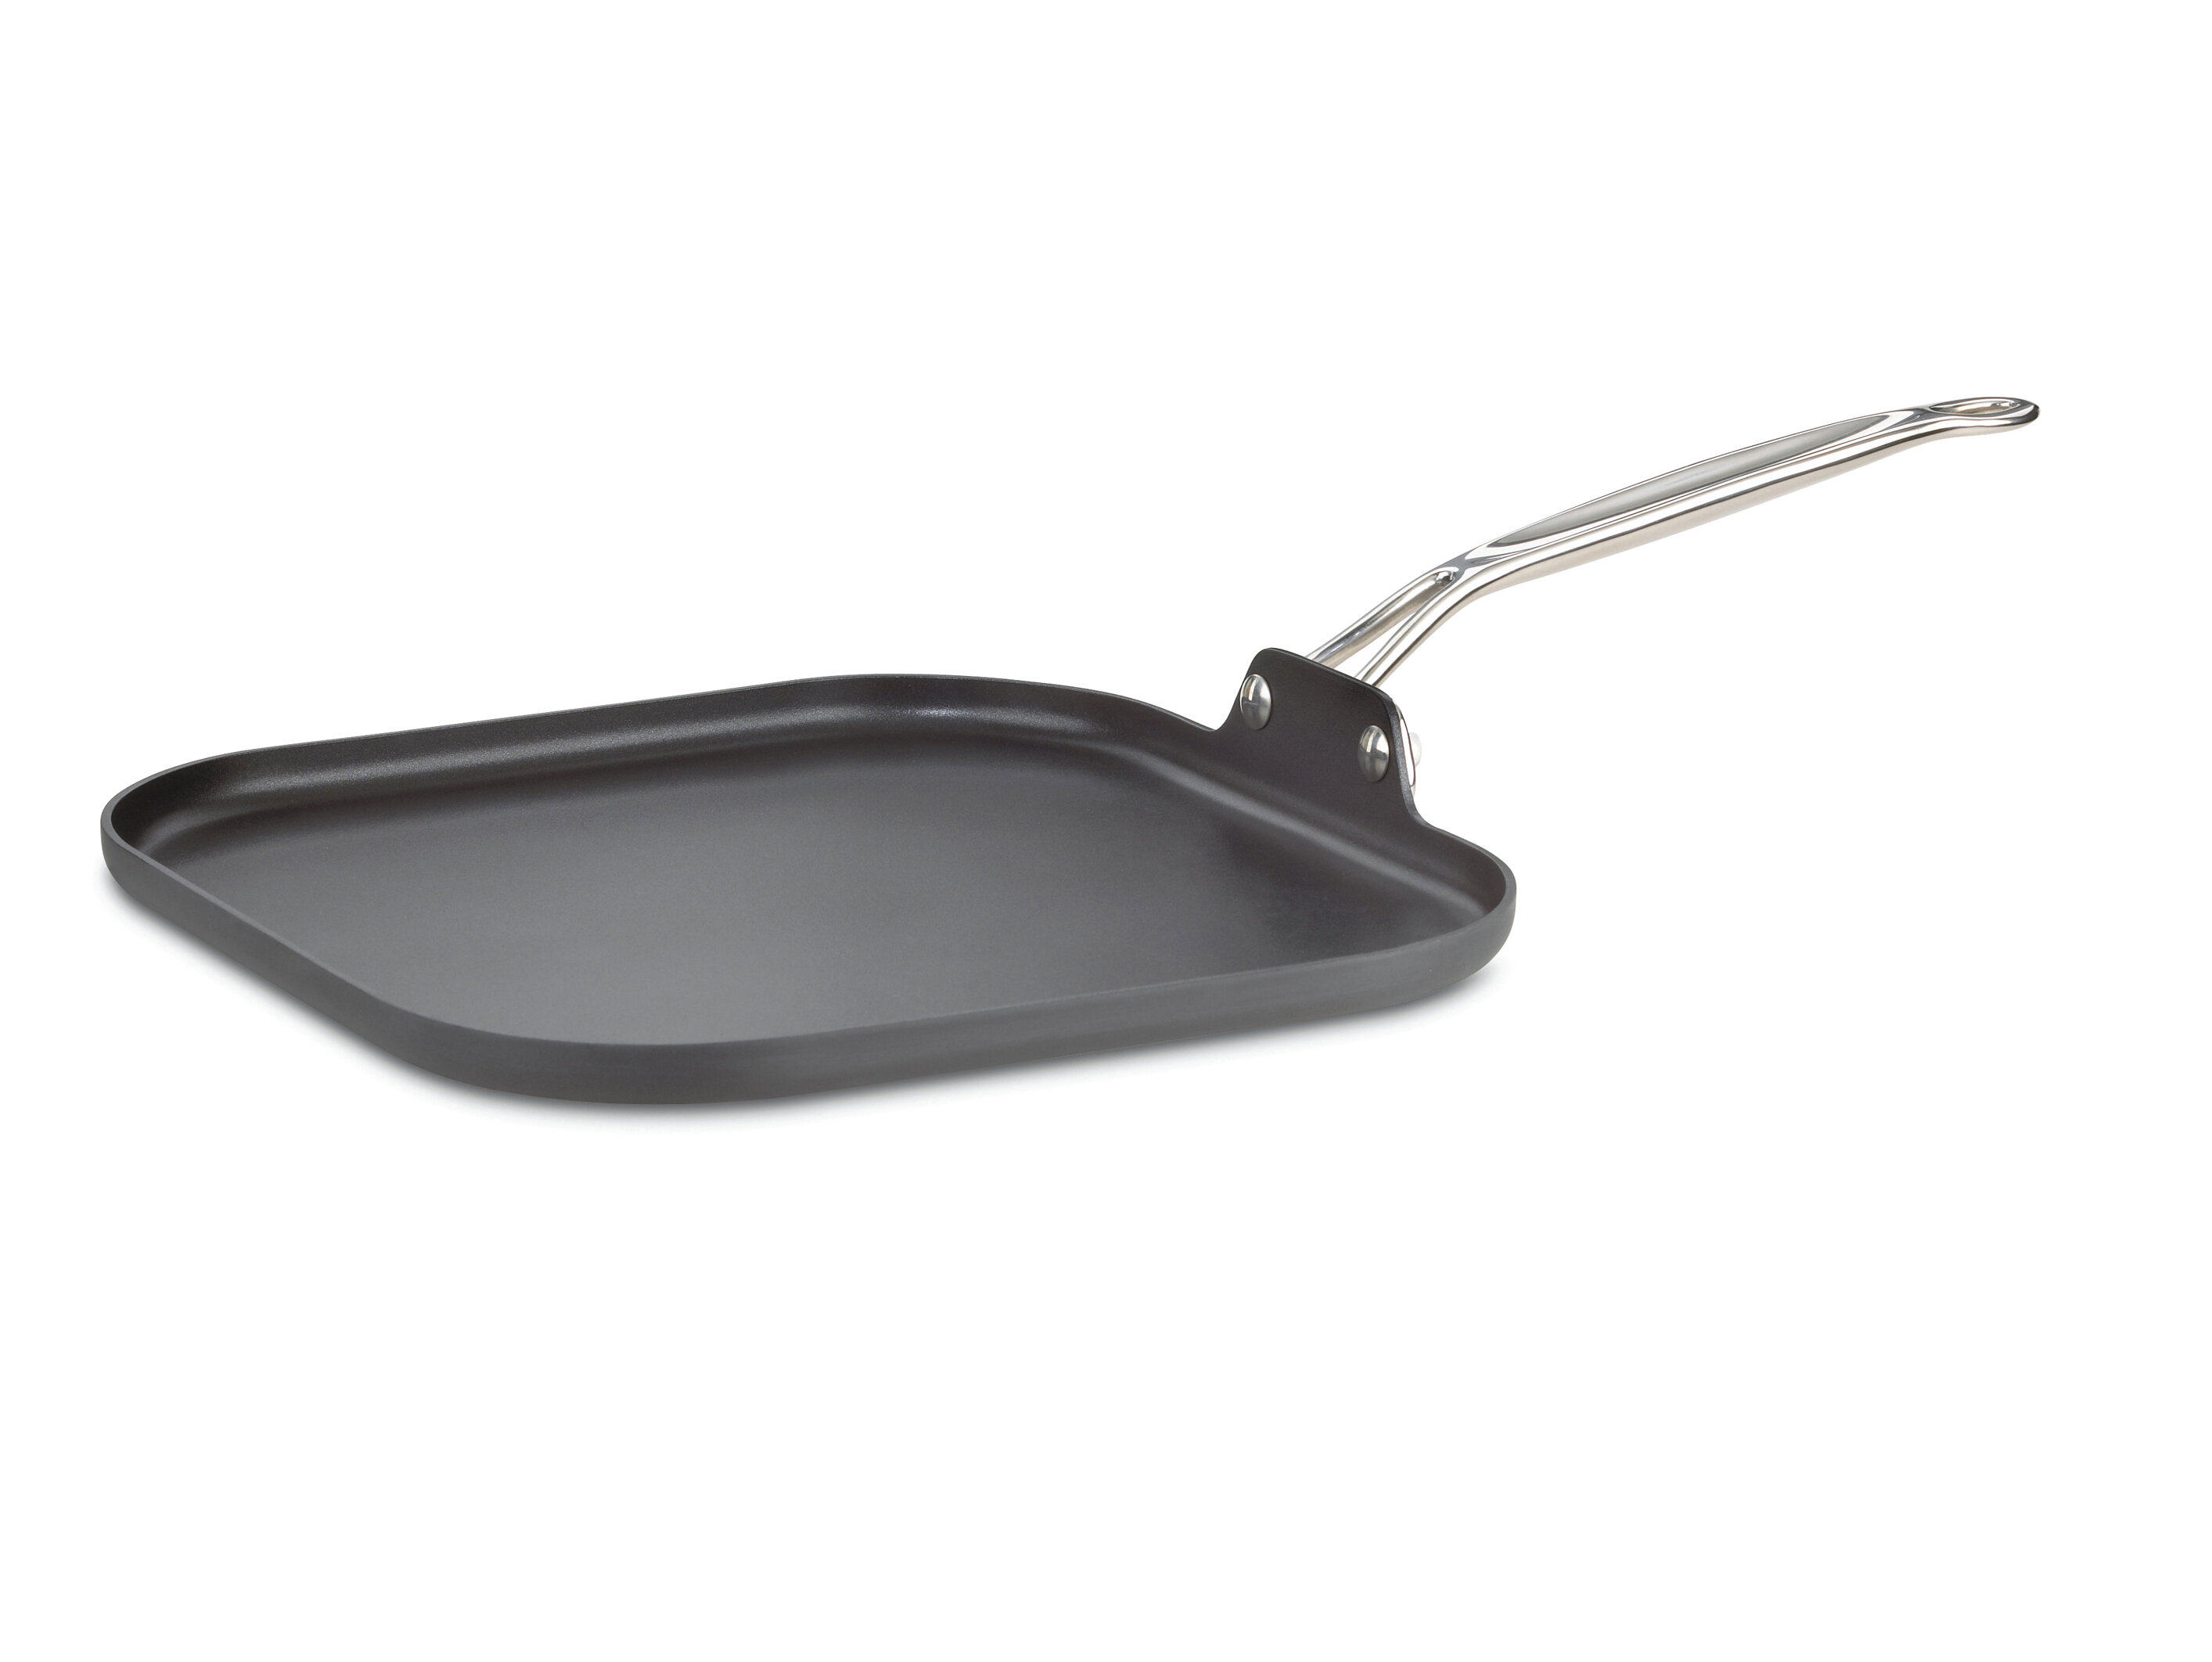 All-Clad HA1 Hard Anodized Nonstick Square Griddle, 11